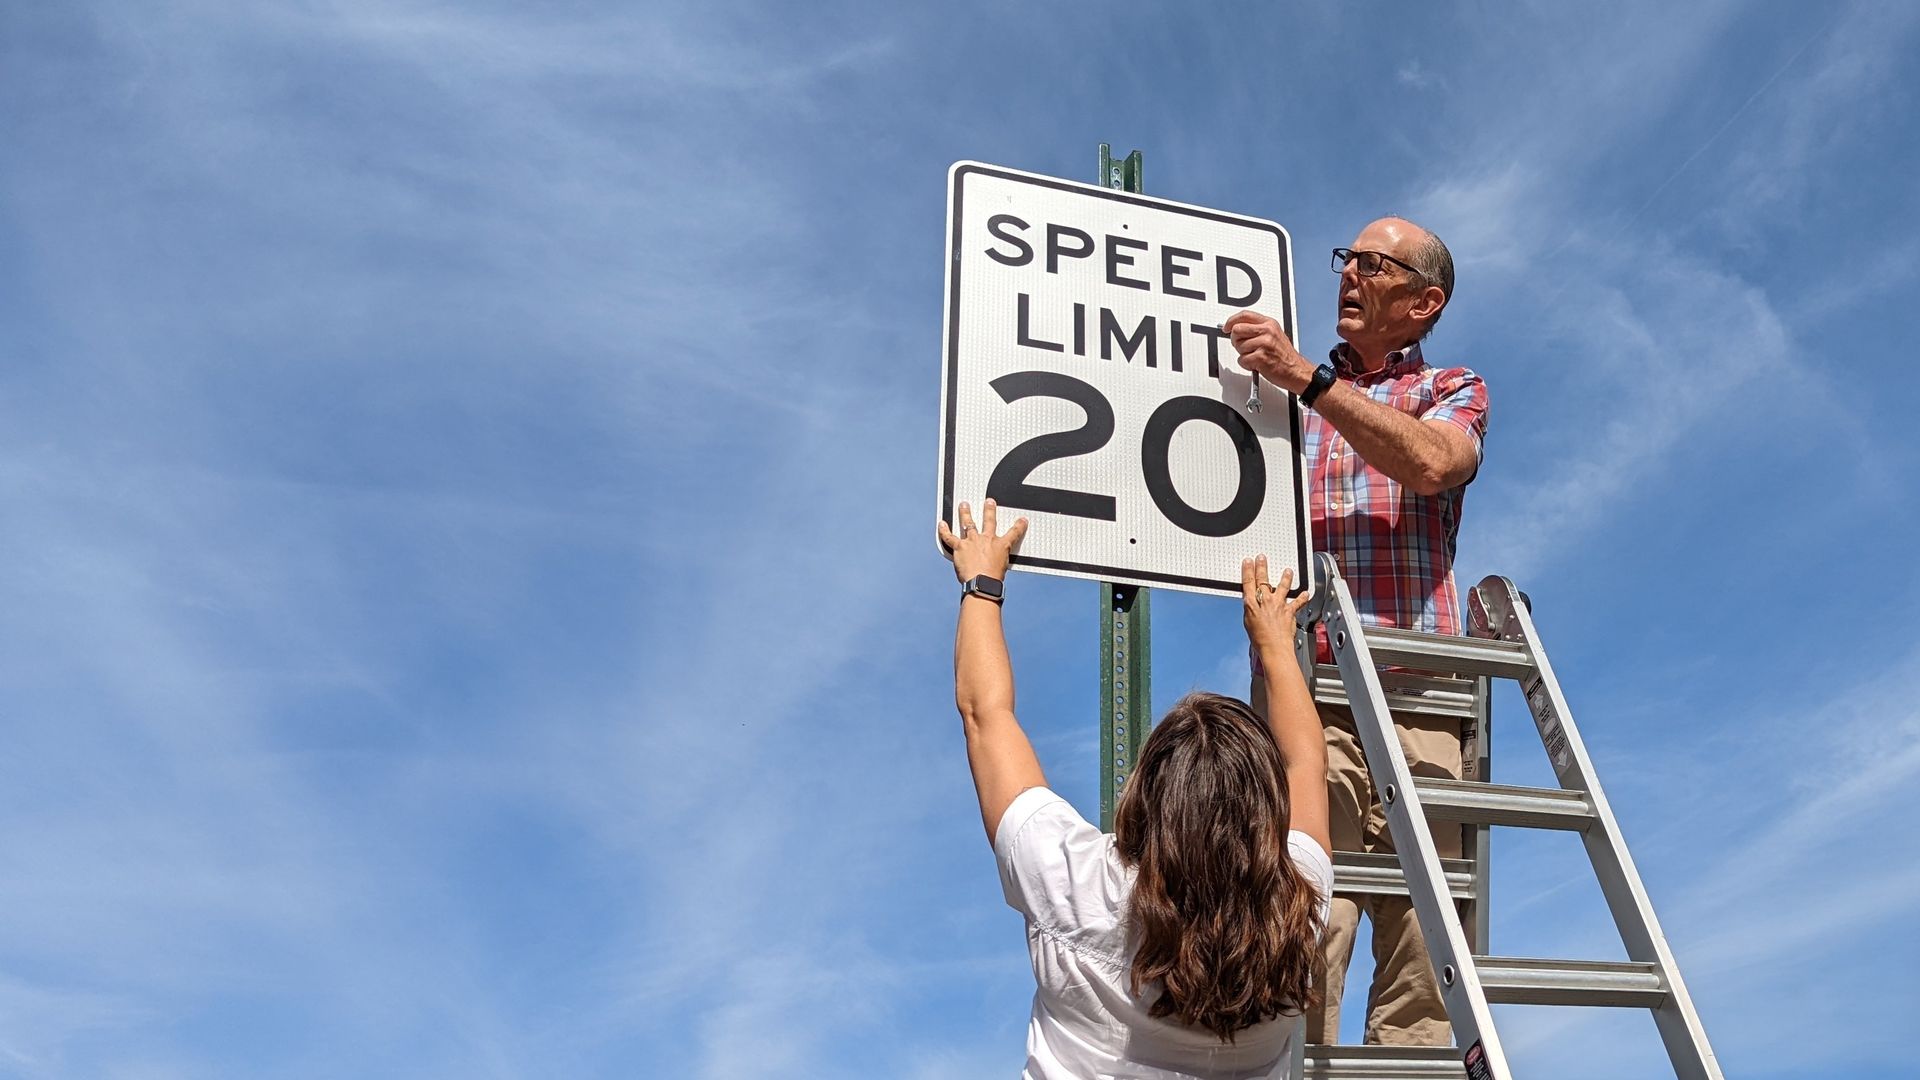 A man and a woman hang a street sign that advertises a speed limit of 20 mph.